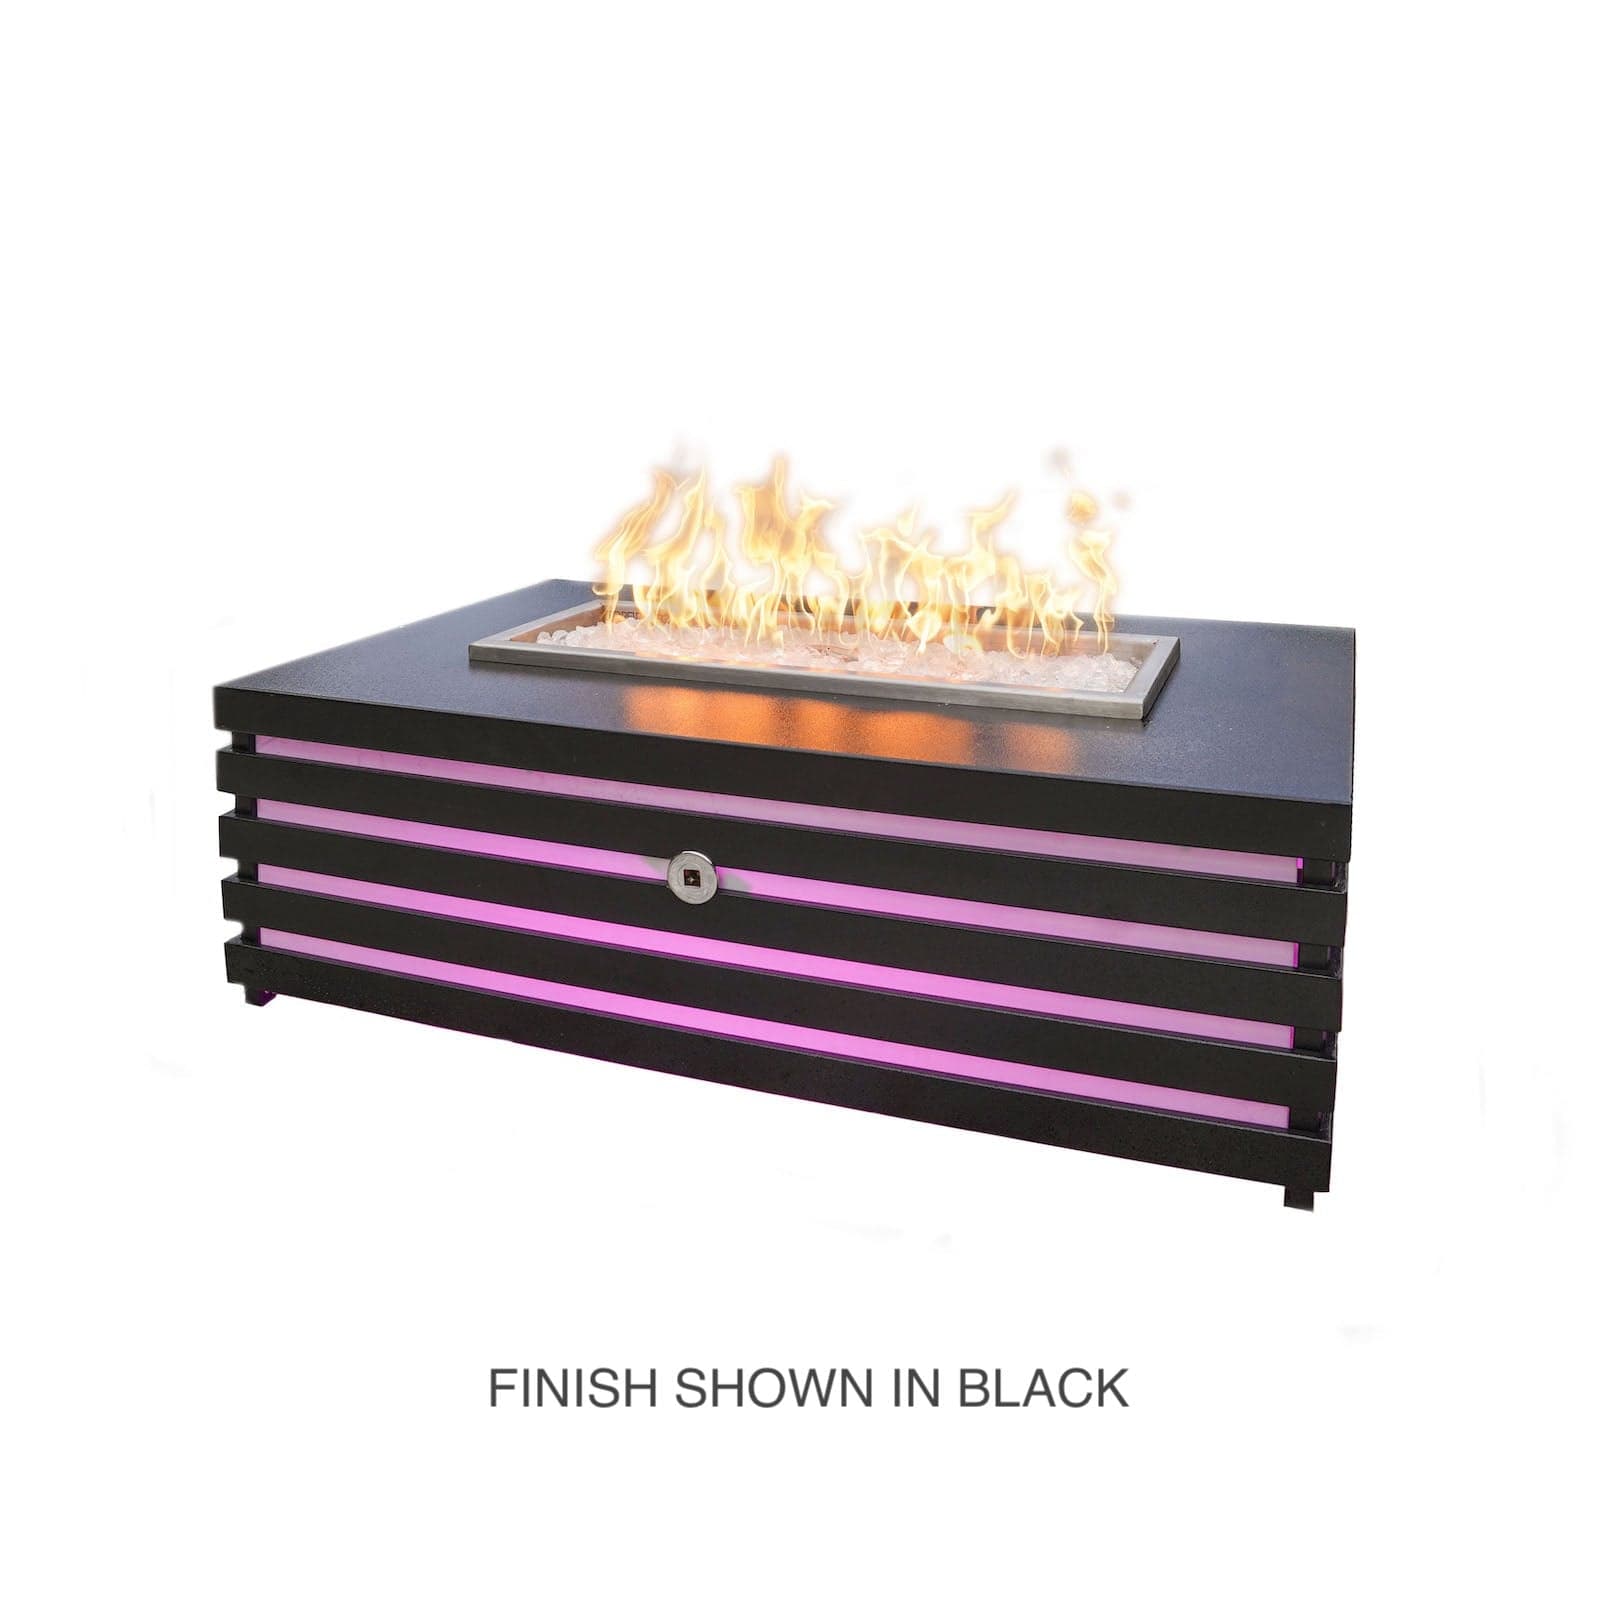 The Outdoor Plus Fire Features The Outdoor Plus 60" Amina Powder Coated Fire Pit / OPT-AMI6024, OPT-AMI6024FSML, OPT-AMI6024FSEN, OPT-AMI6024E12V, OPT-AMI6024EKIT